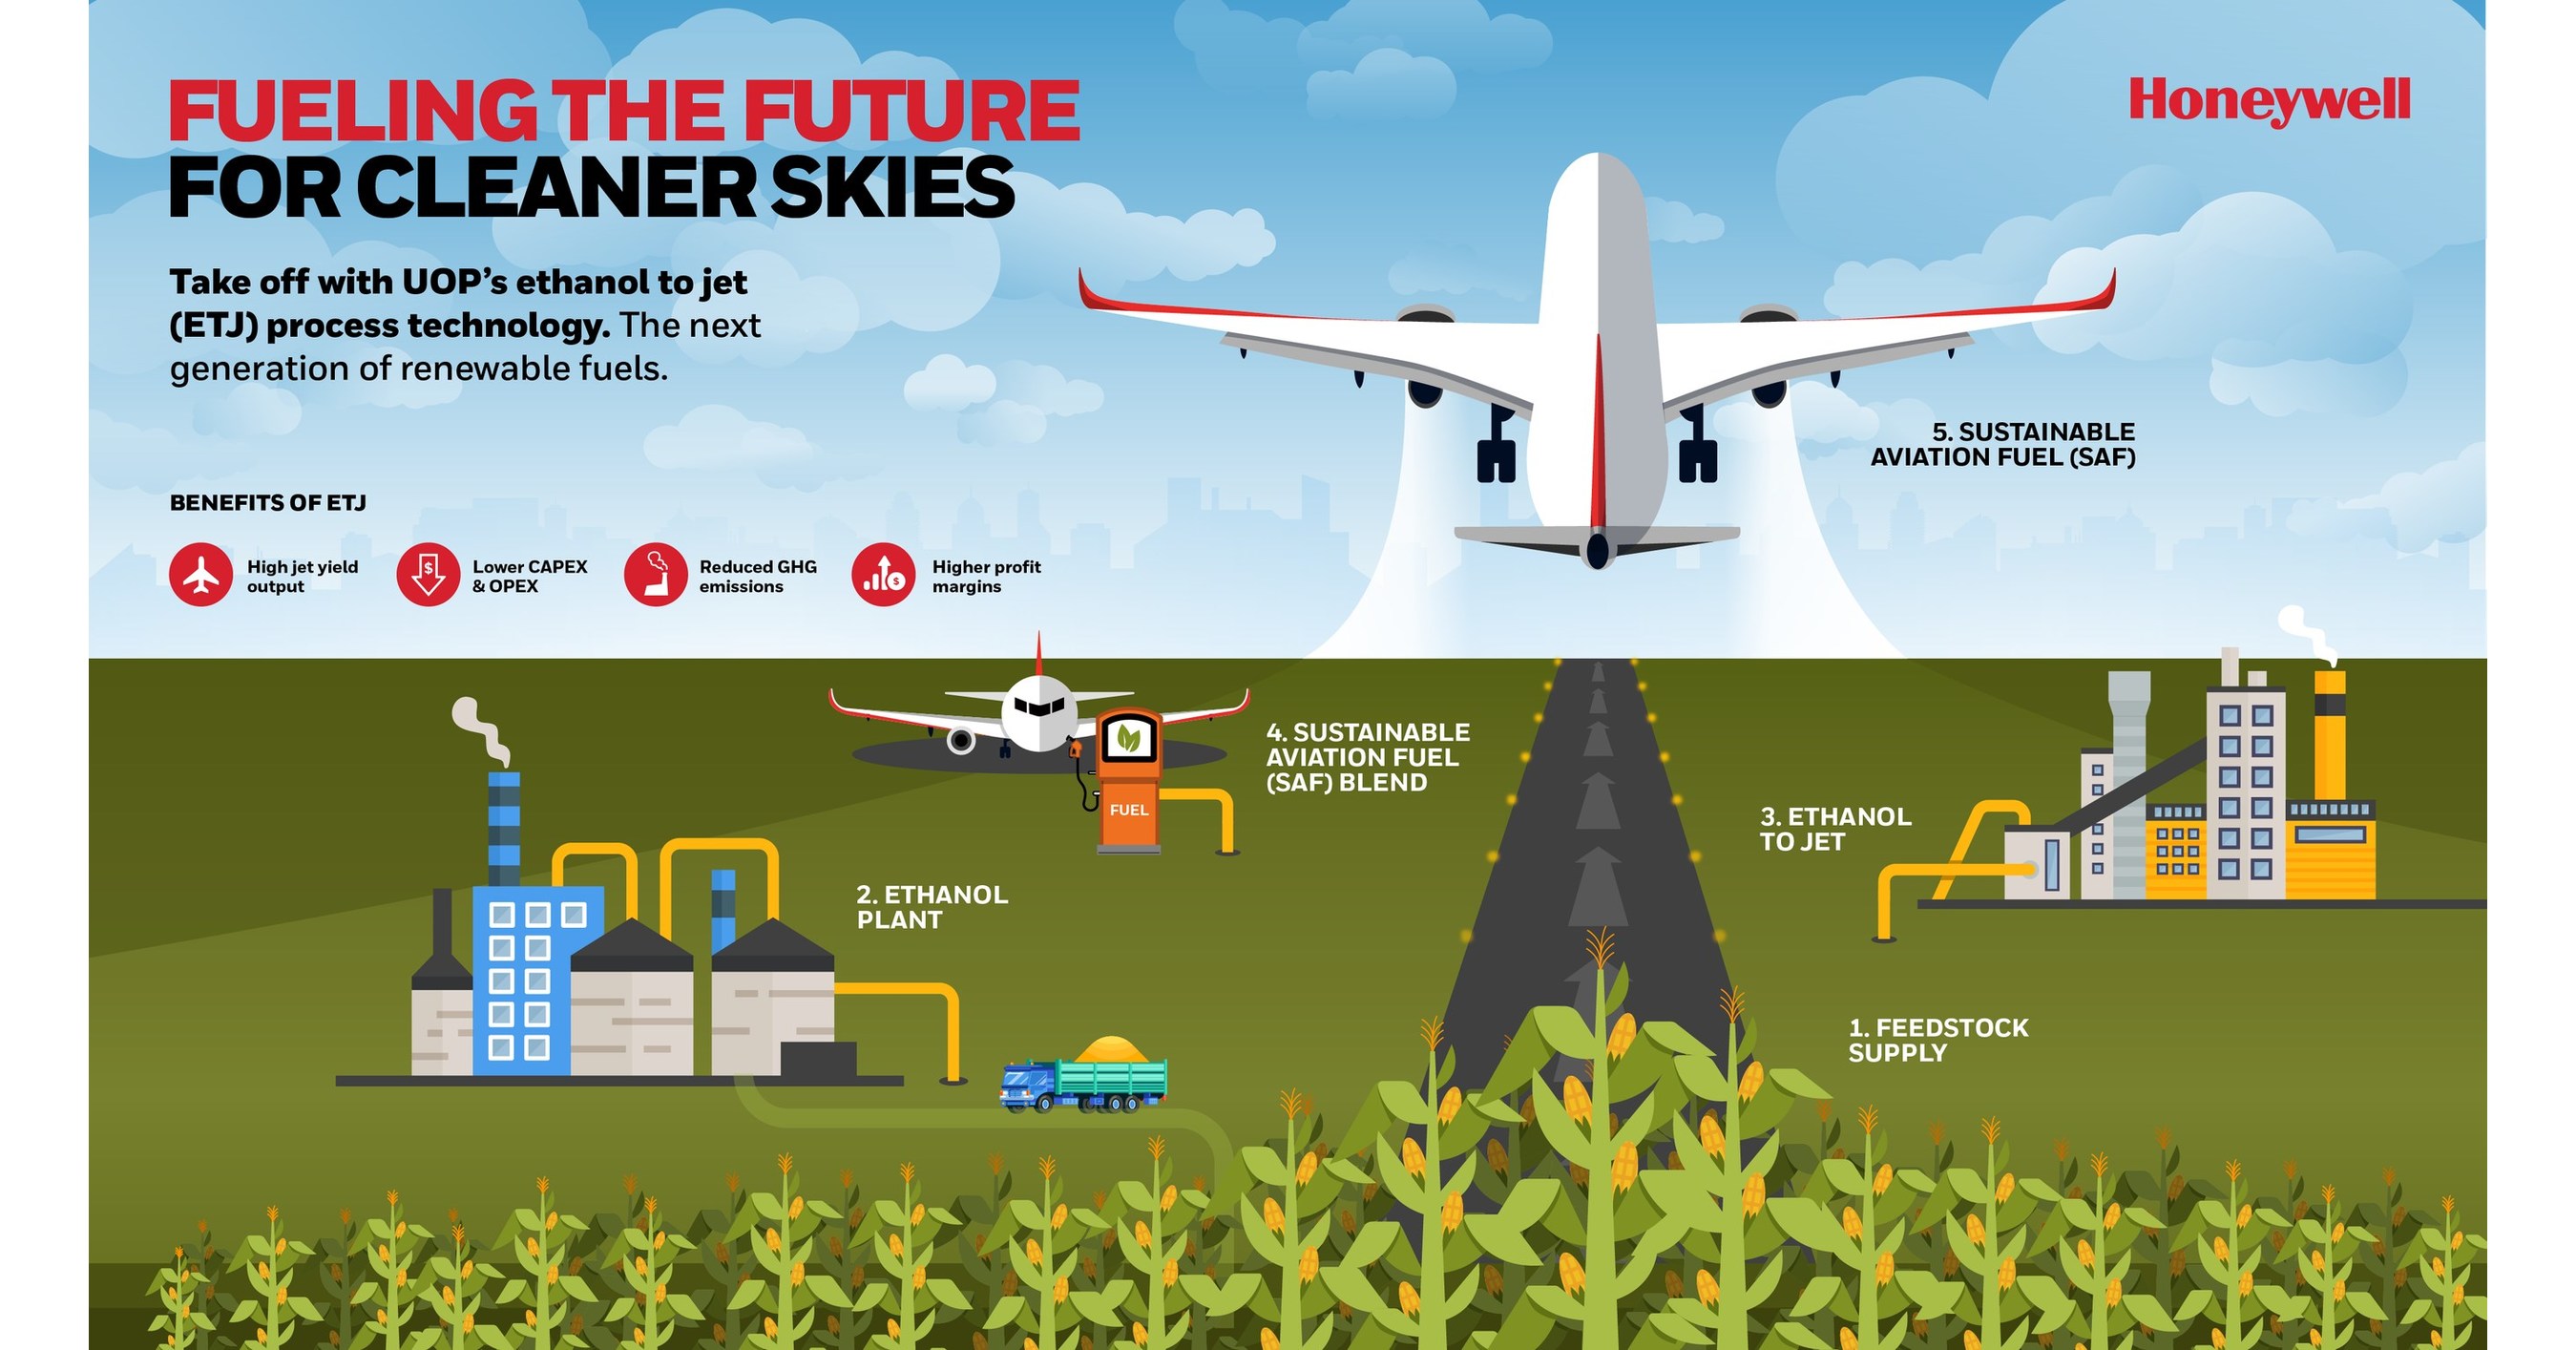 HONEYWELL REVOLUTIONIZES ETHANOL-TO-JET FUEL TECHNOLOGY TO MEET RISING  DEMAND FOR SUSTAINABLE AVIATION FUEL